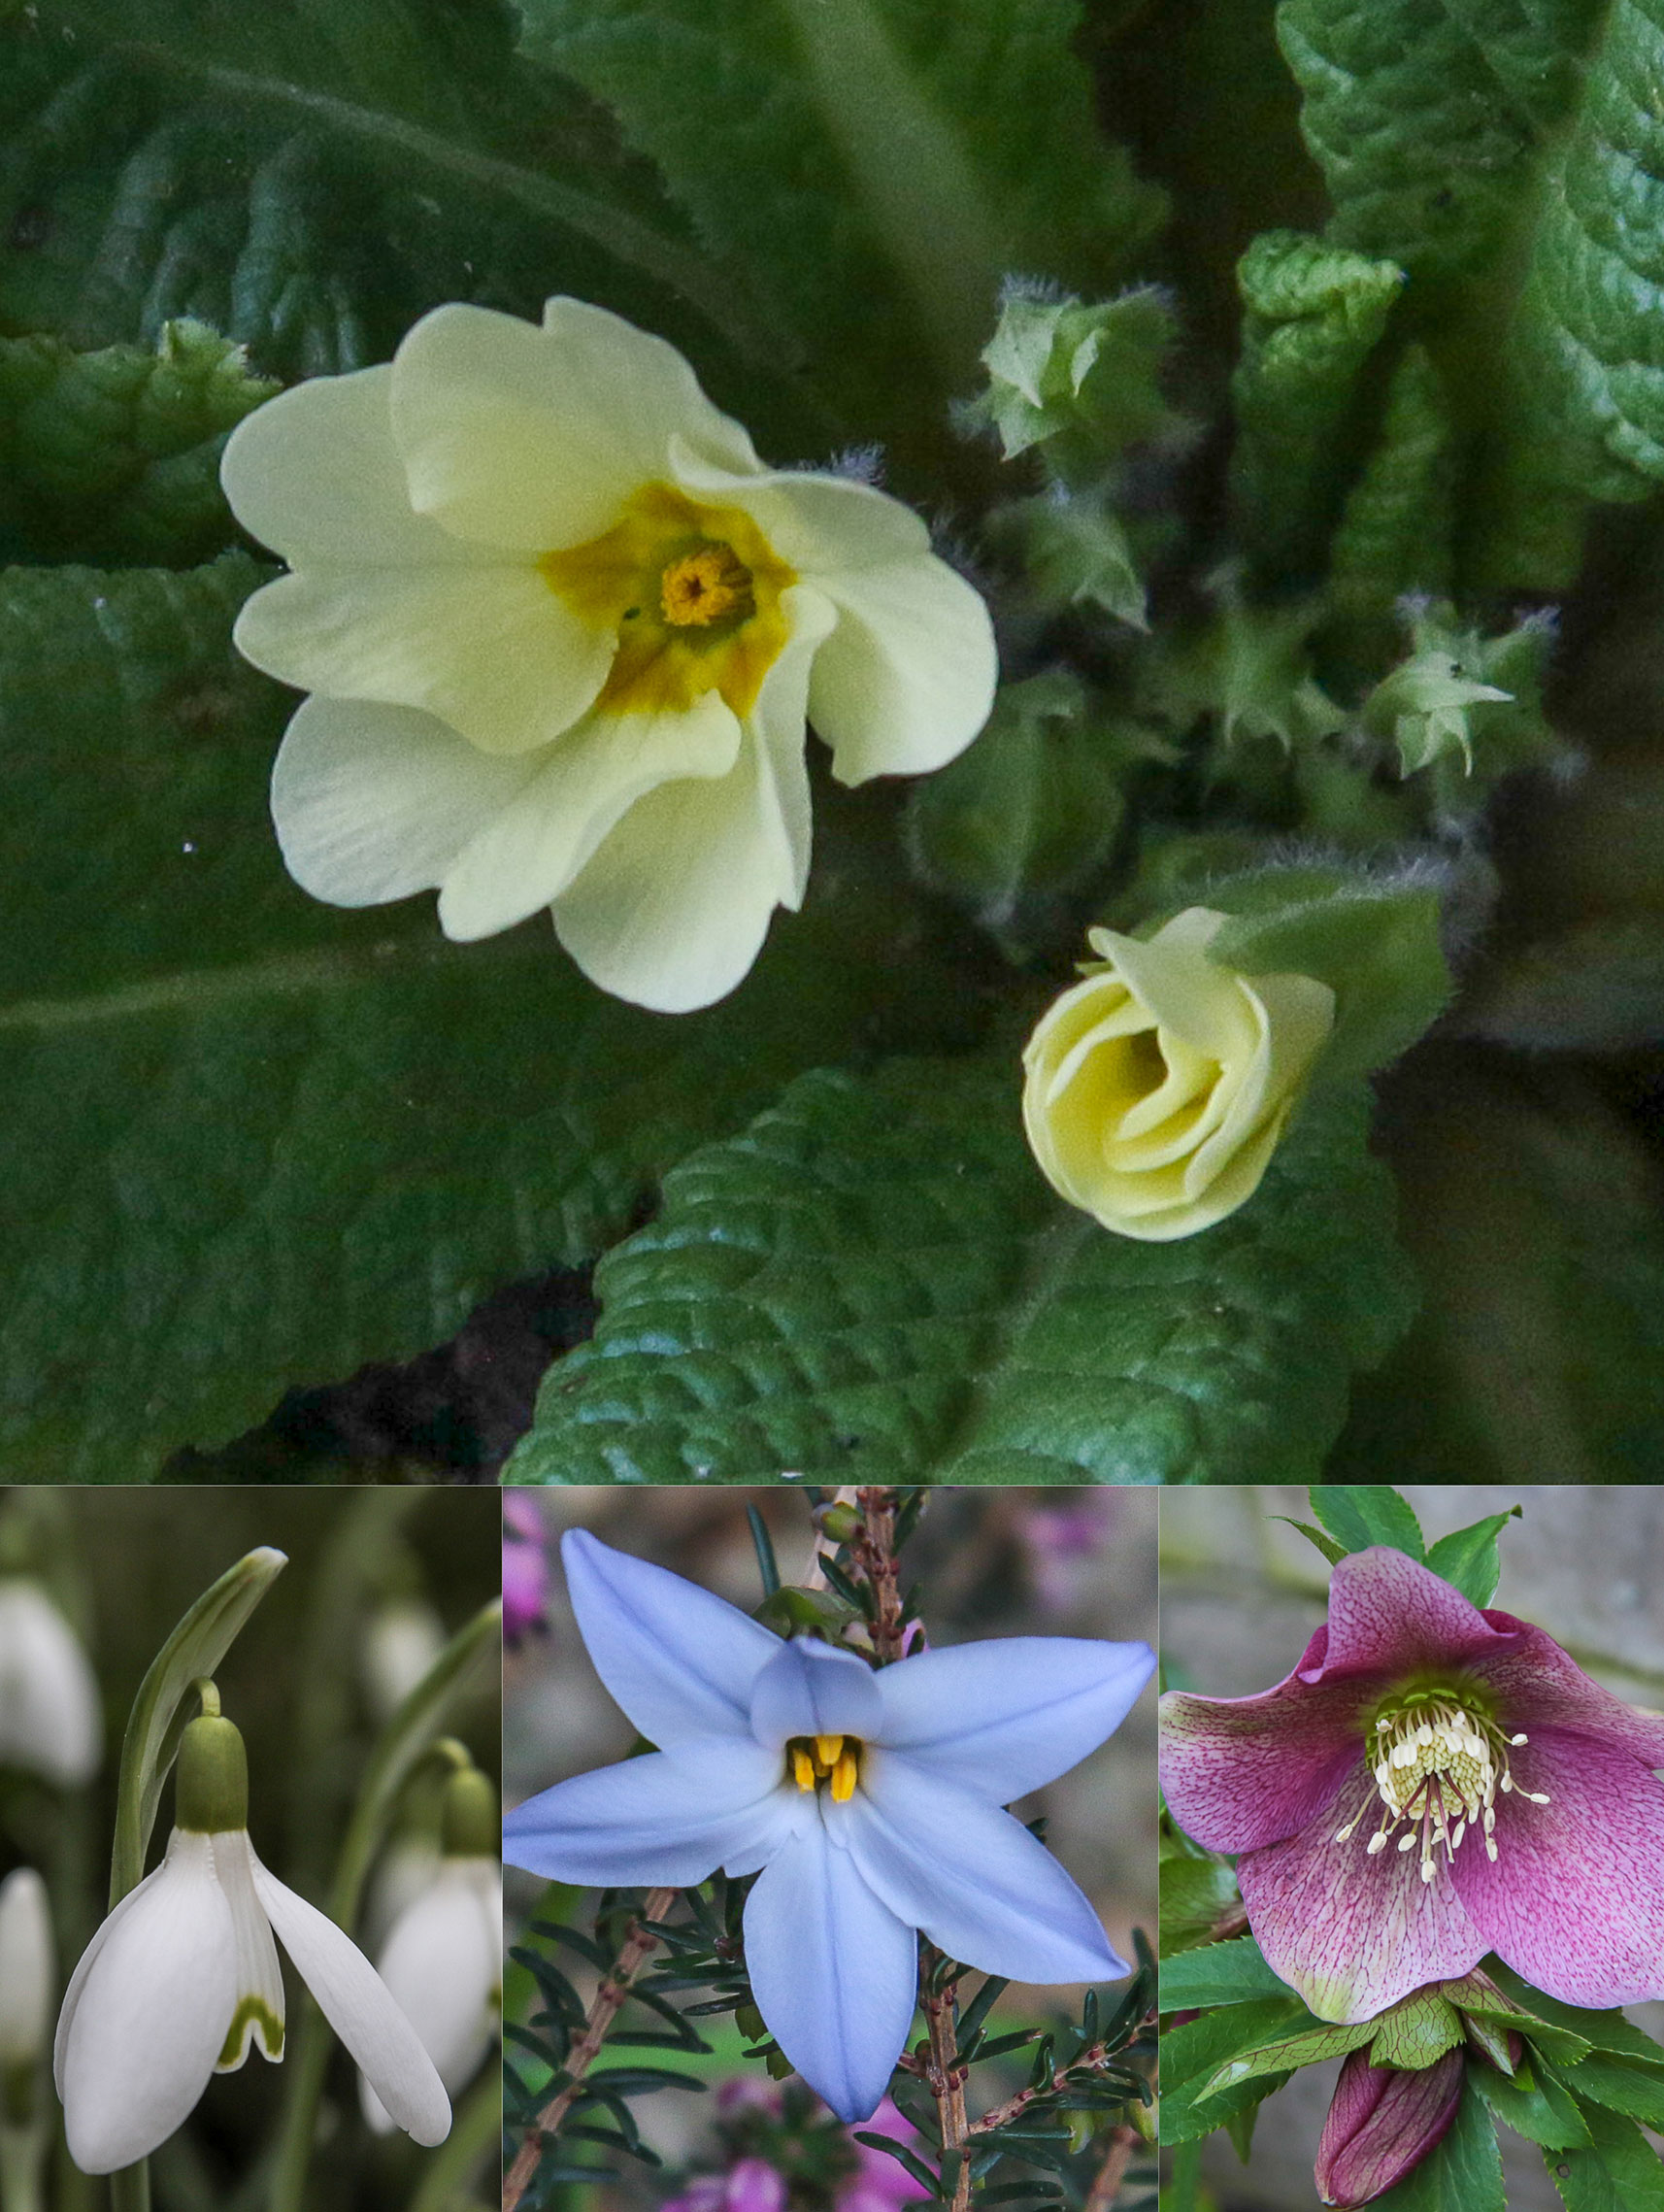 SOME OF THE GARDEN SPRING FLOWERS